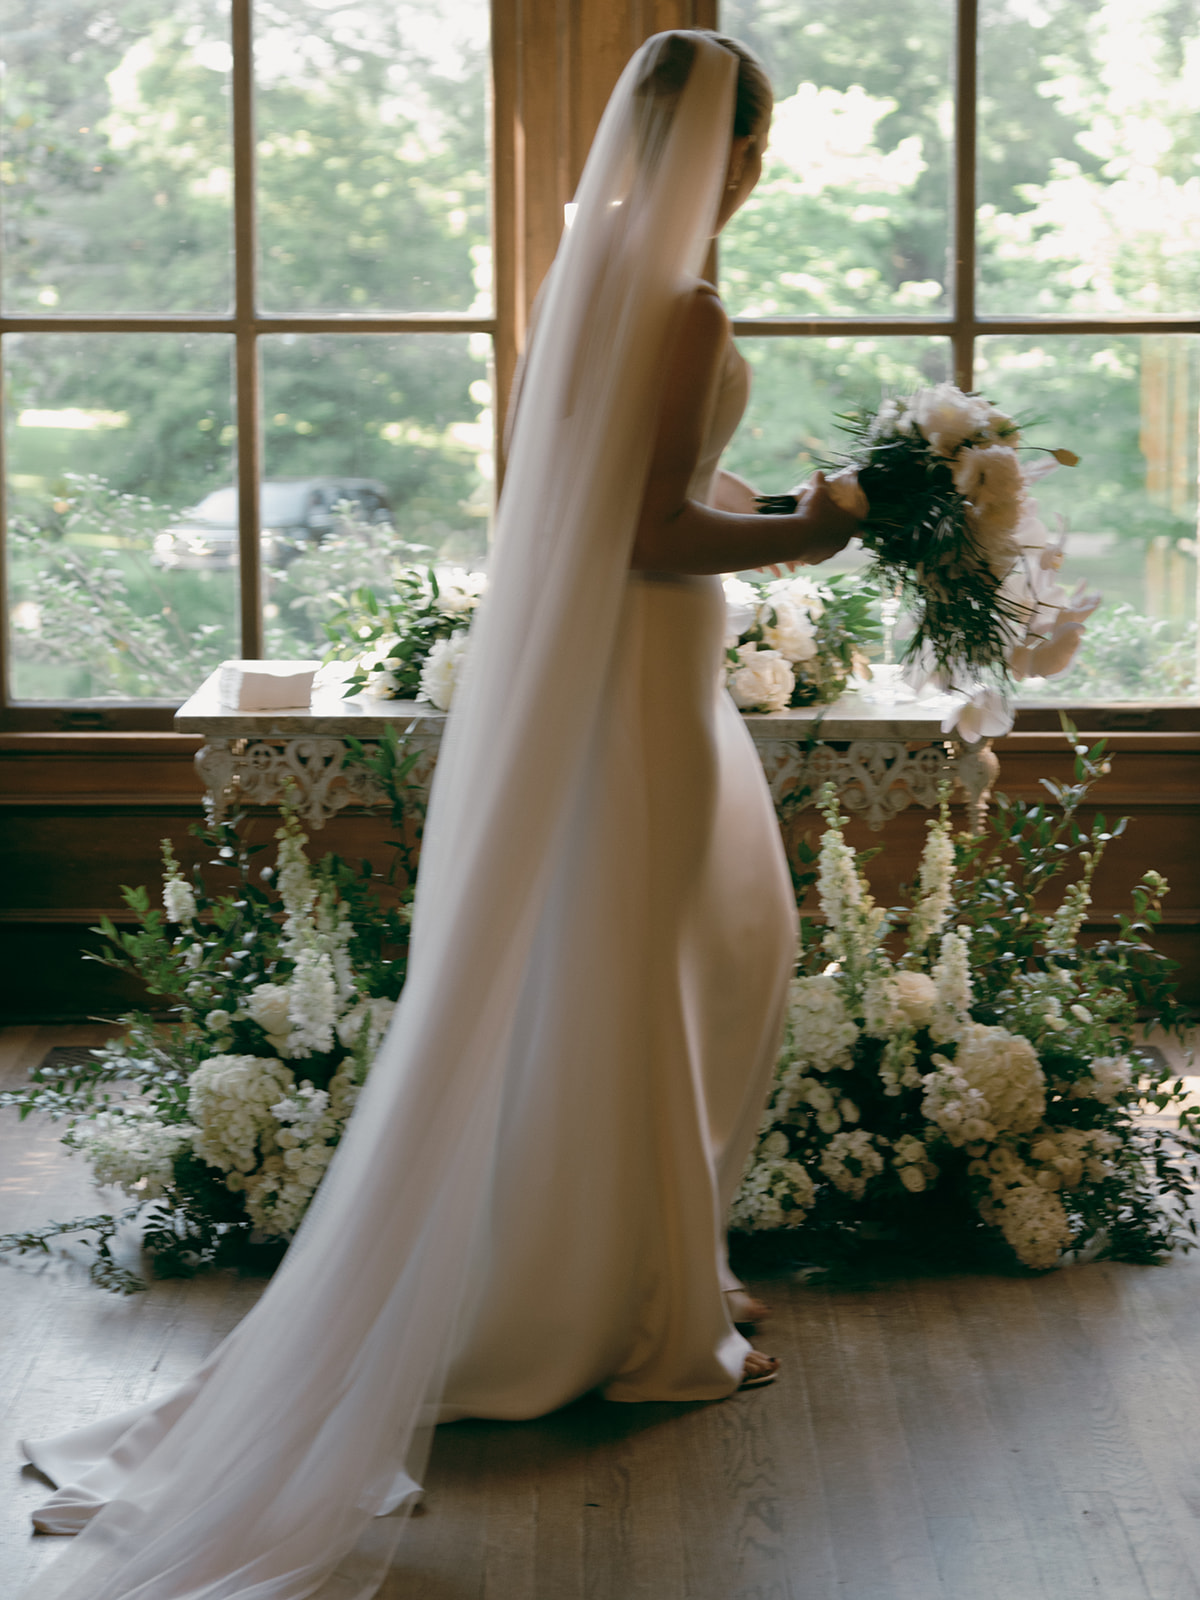 The bride wore a dramatic cathedral veil with a classic and simple wedding gown at this Annesdale Mansion wedding 